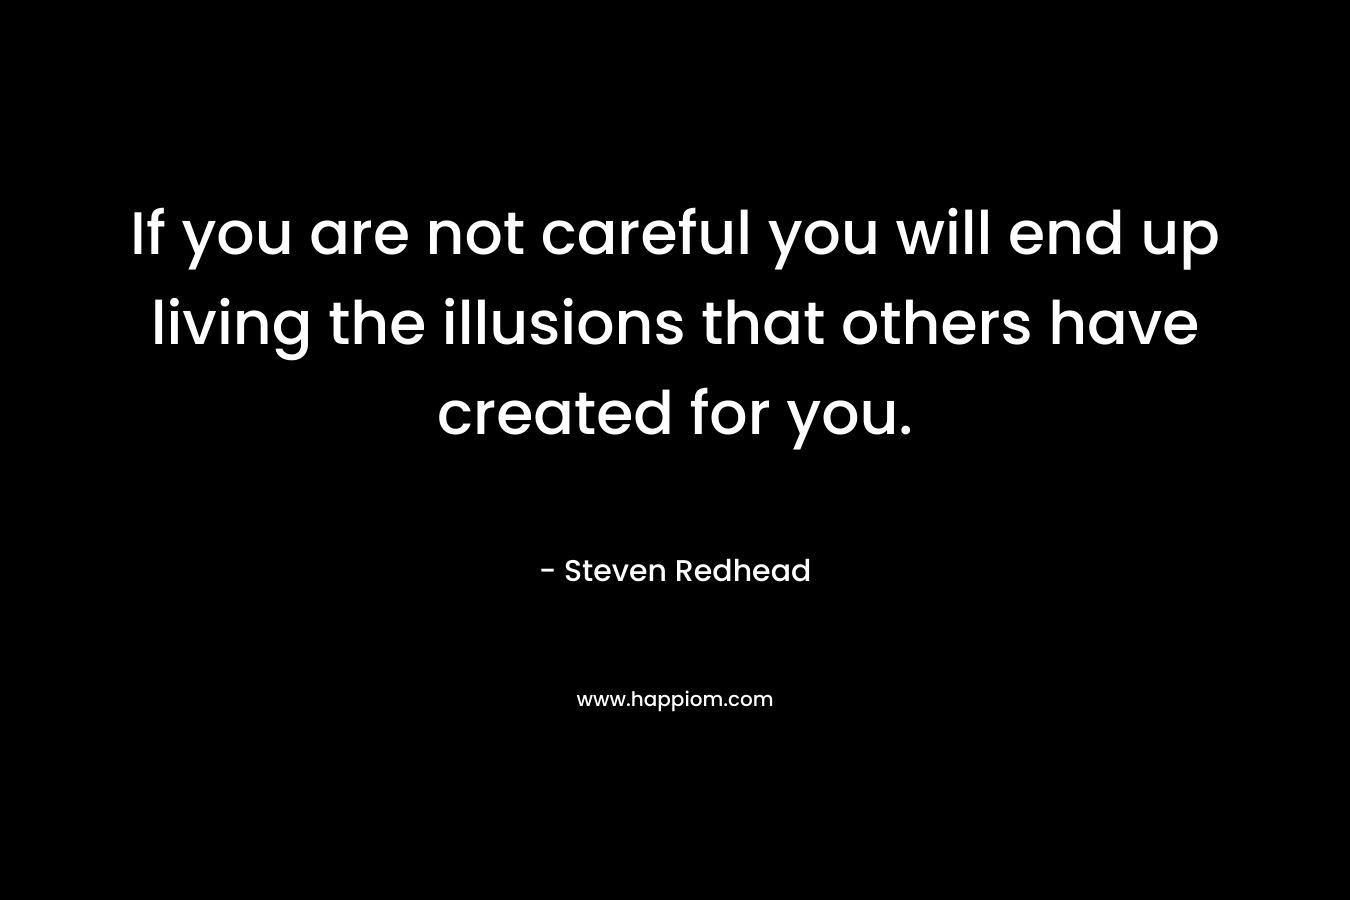 If you are not careful you will end up living the illusions that others have created for you.